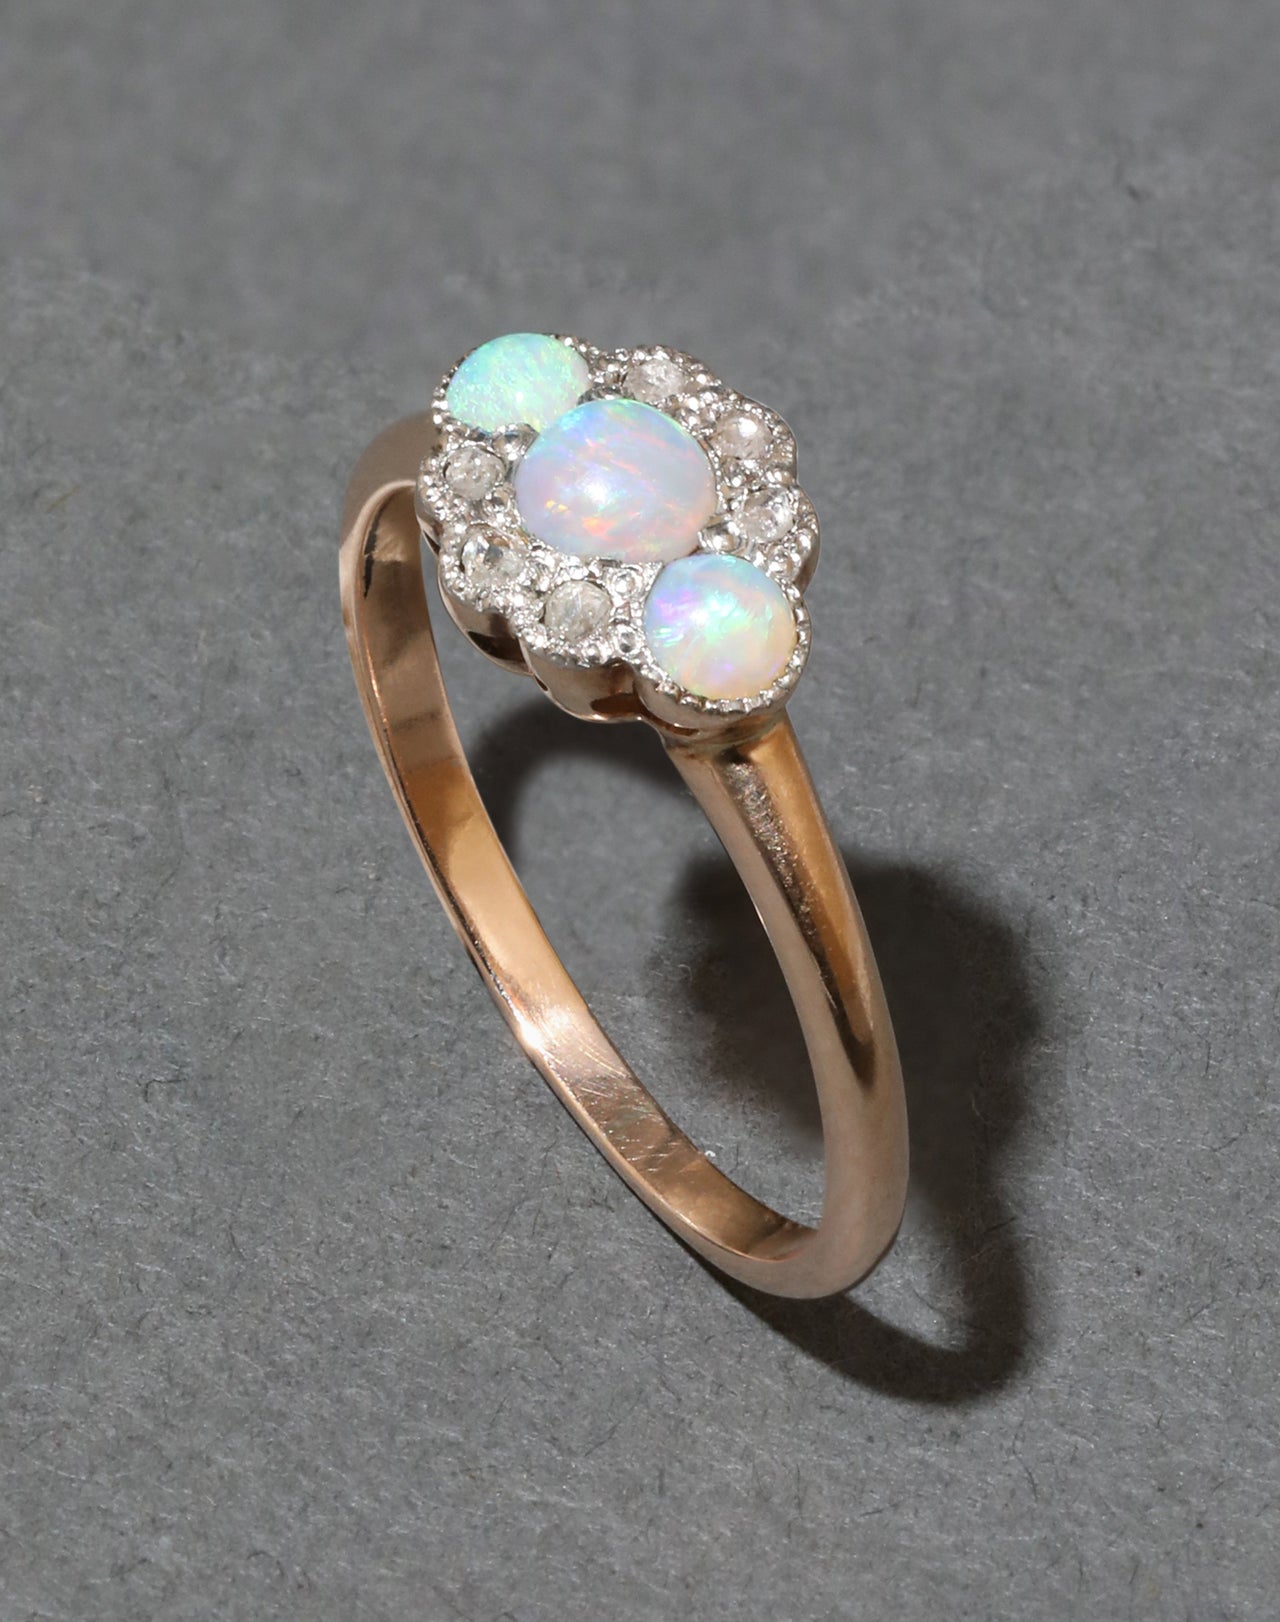 Antique Scalloped 14k Gold Ring with Opal and Diamond - Photo 2